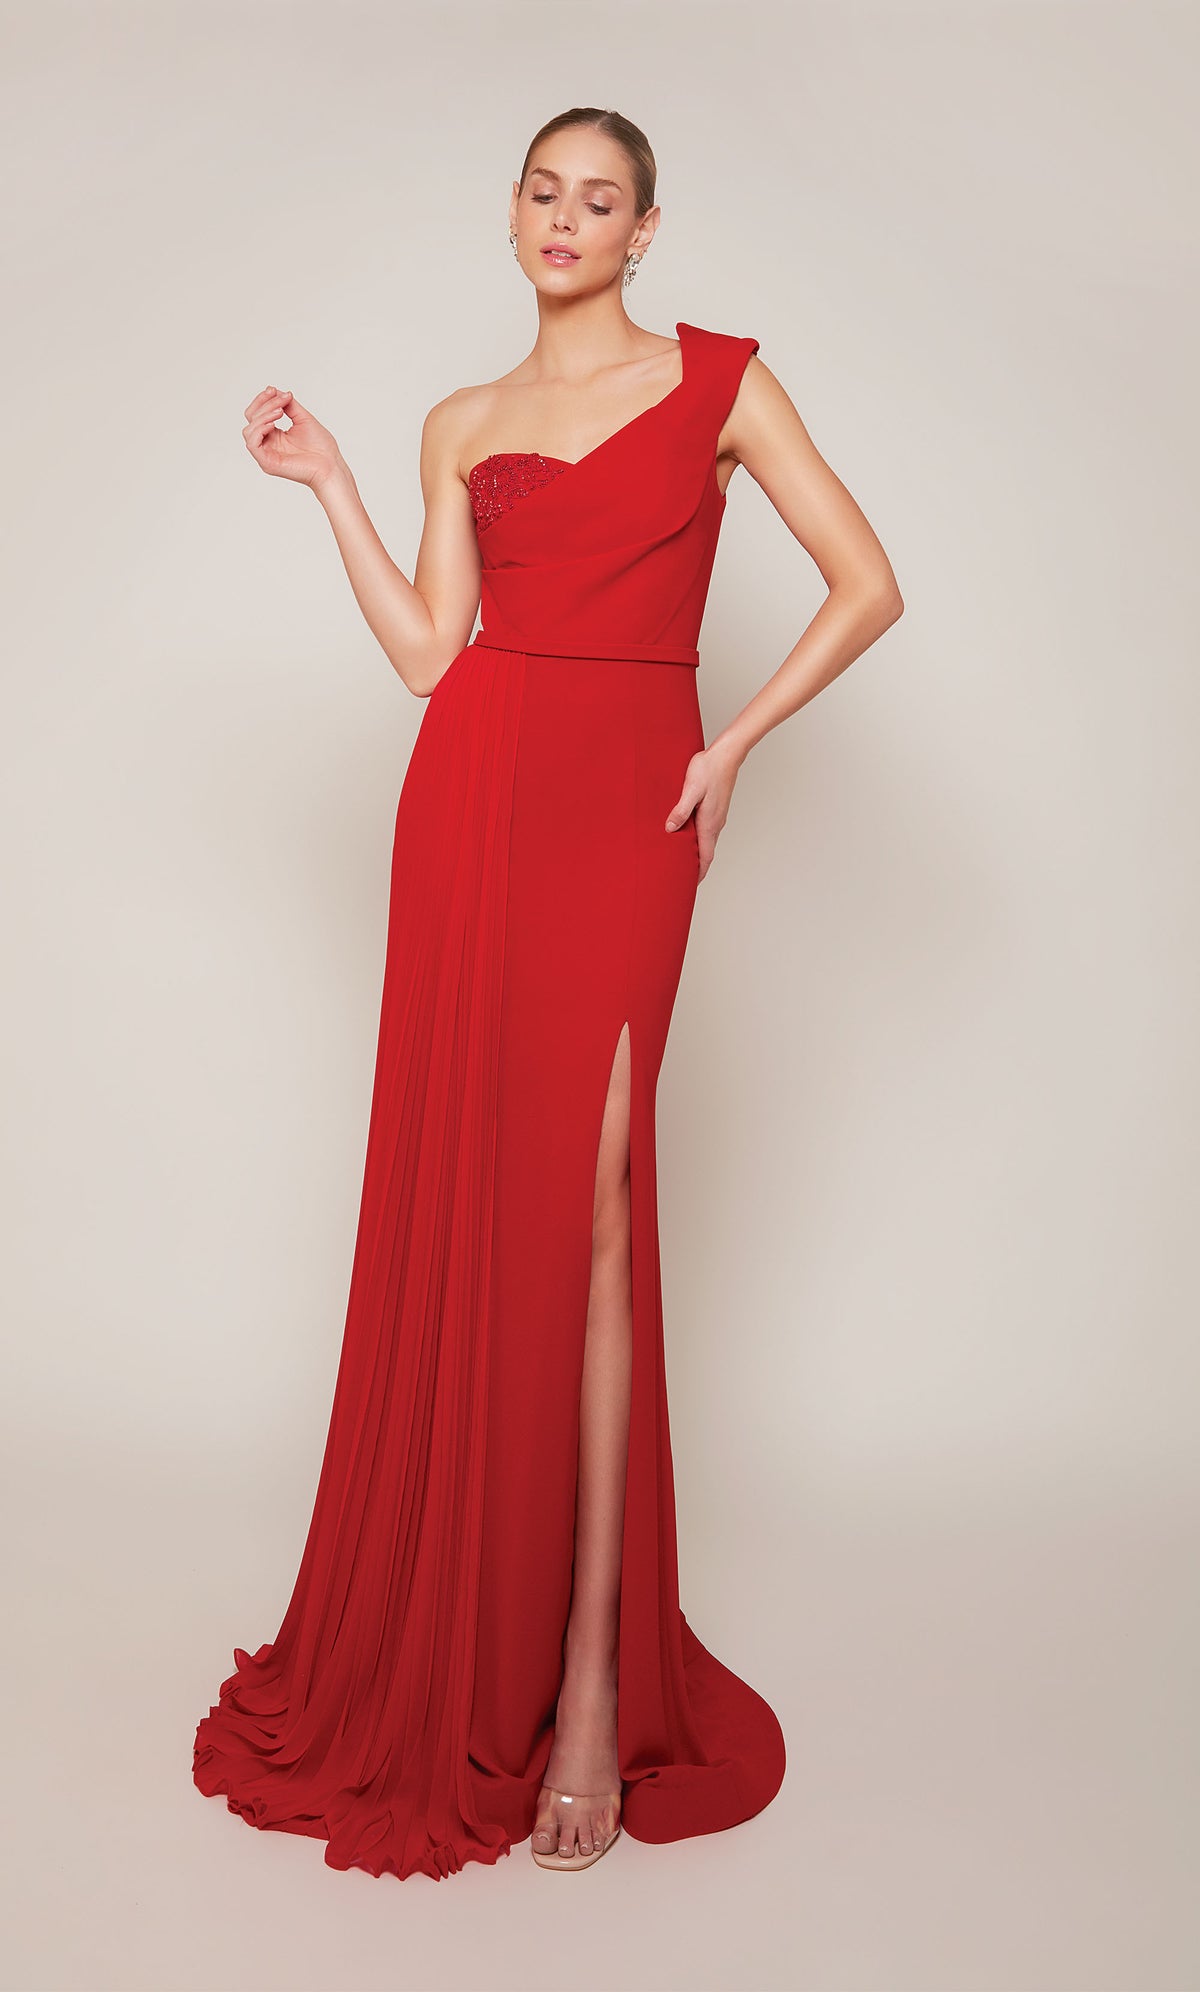 A long formal dress with a one shoulder neckline and side slit in a vibrant red.